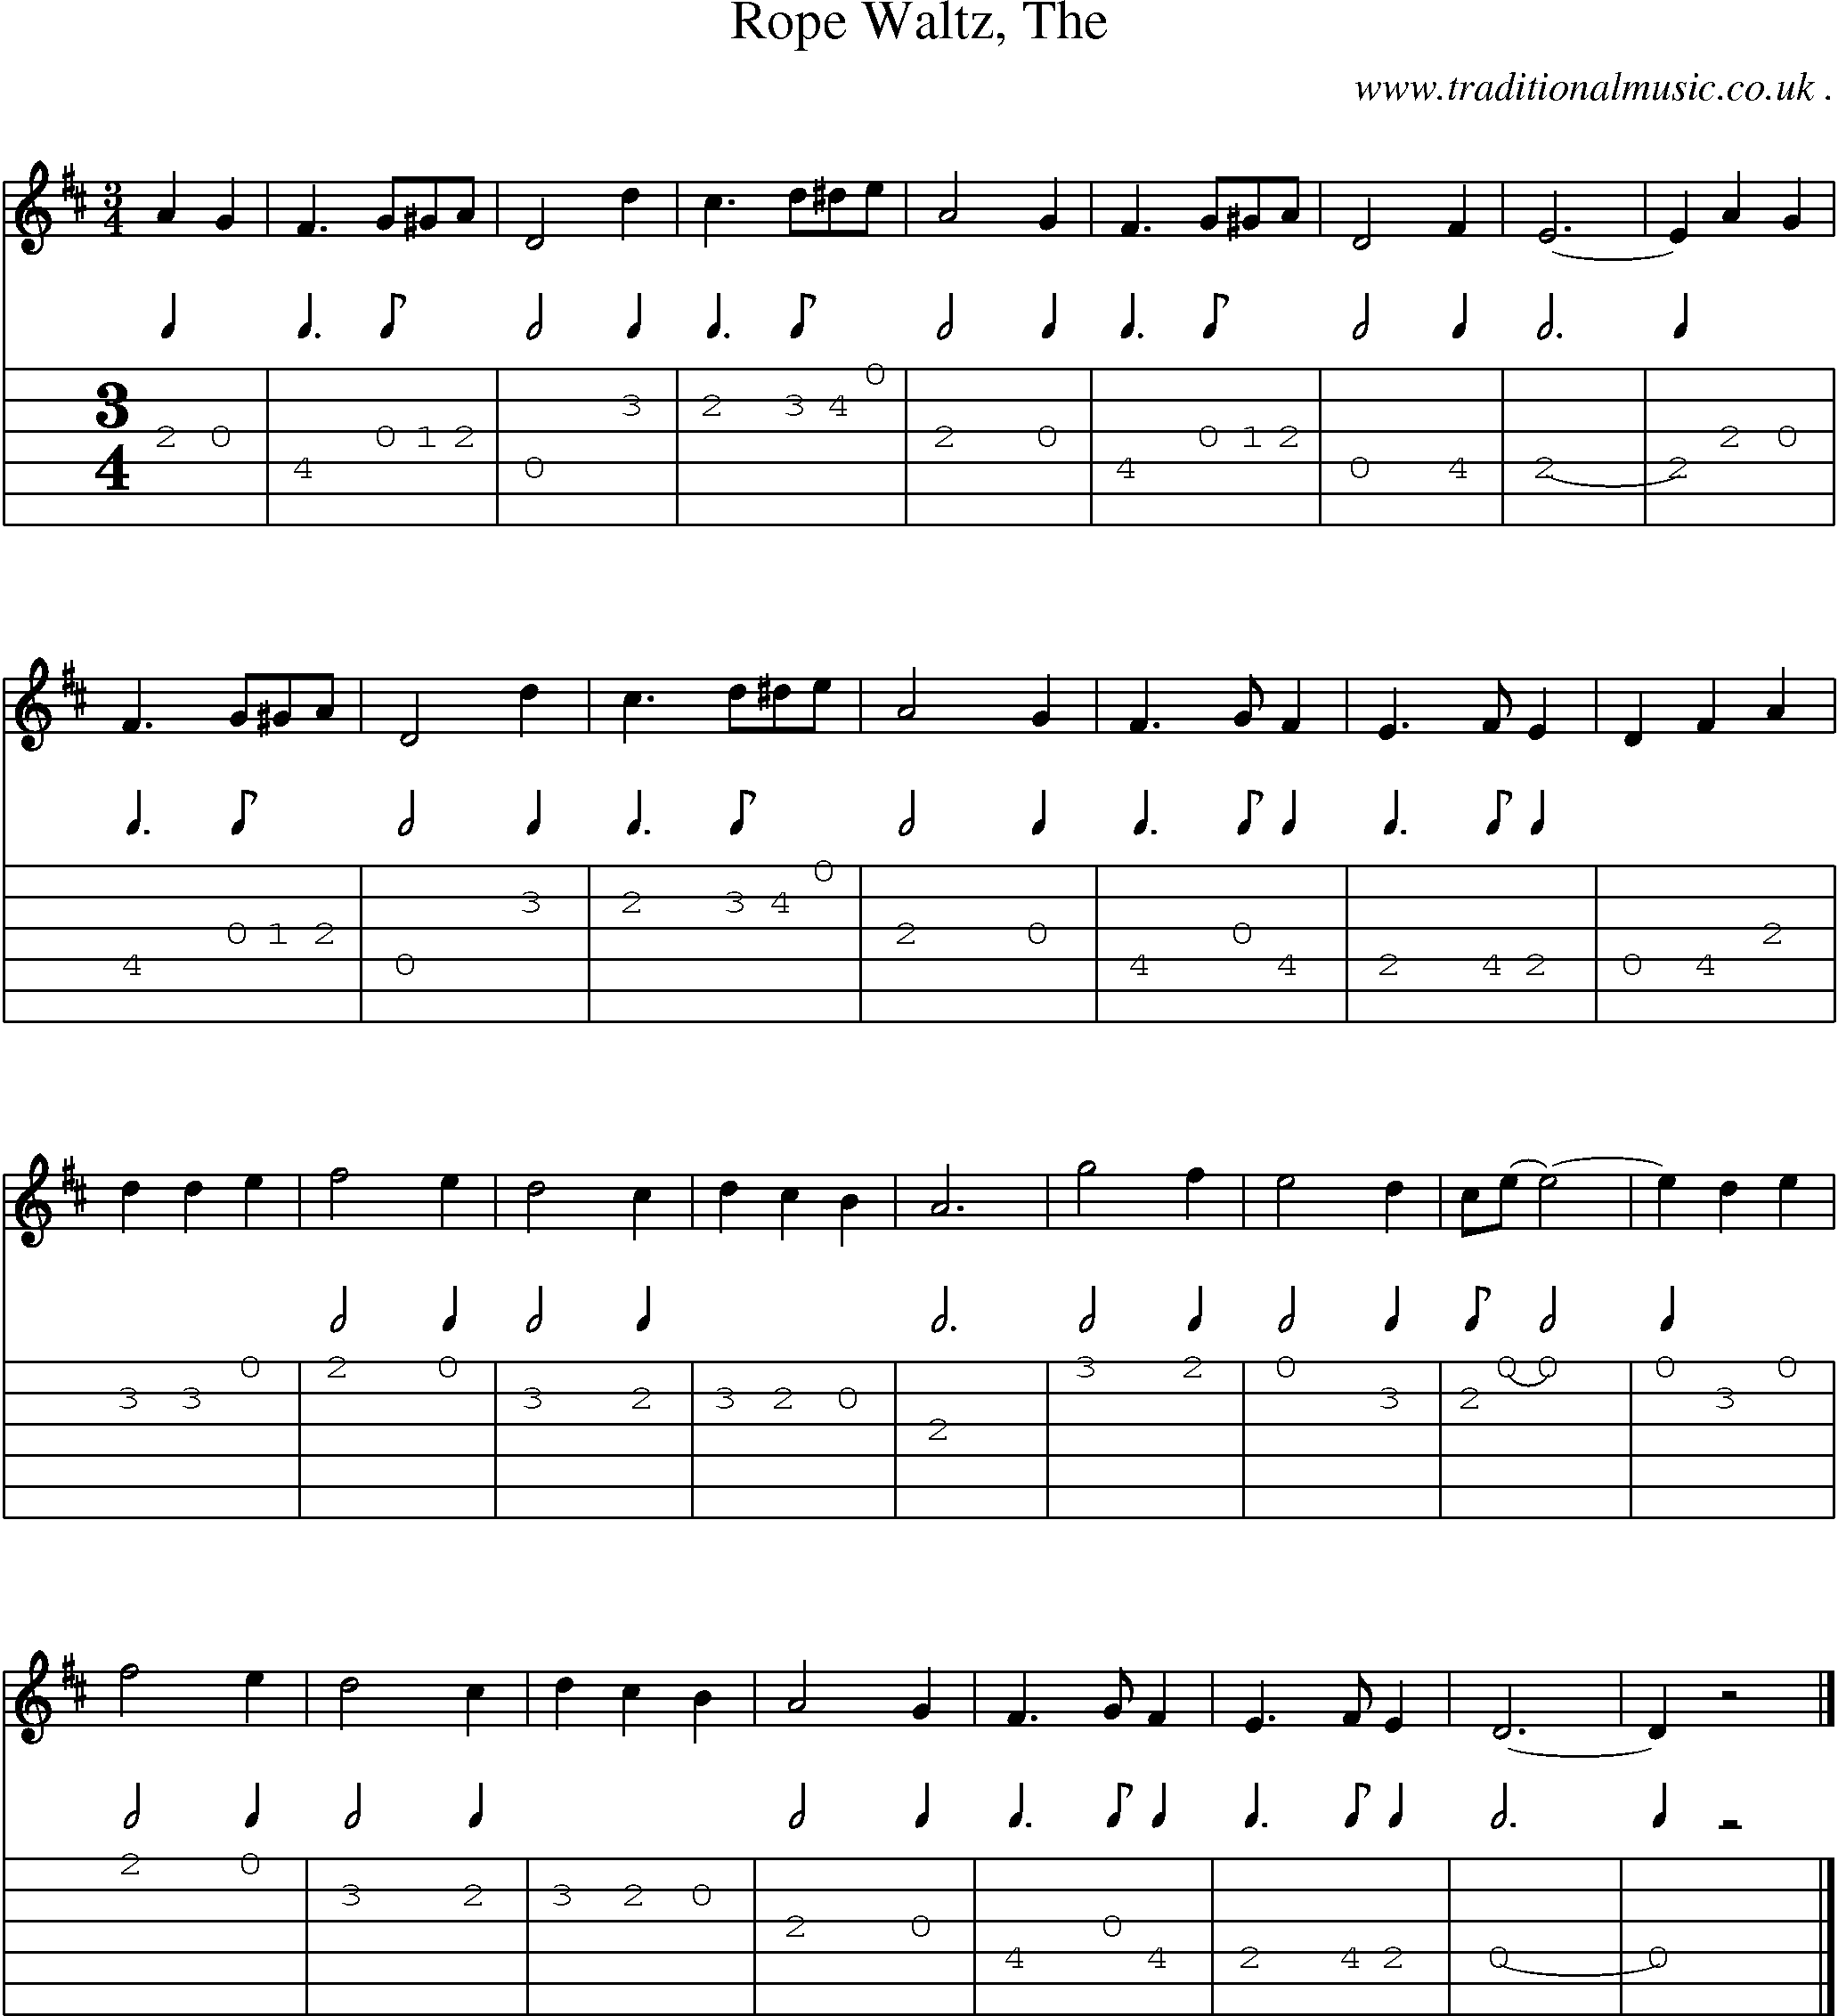 Sheet-music  score, Chords and Guitar Tabs for Rope Waltz The